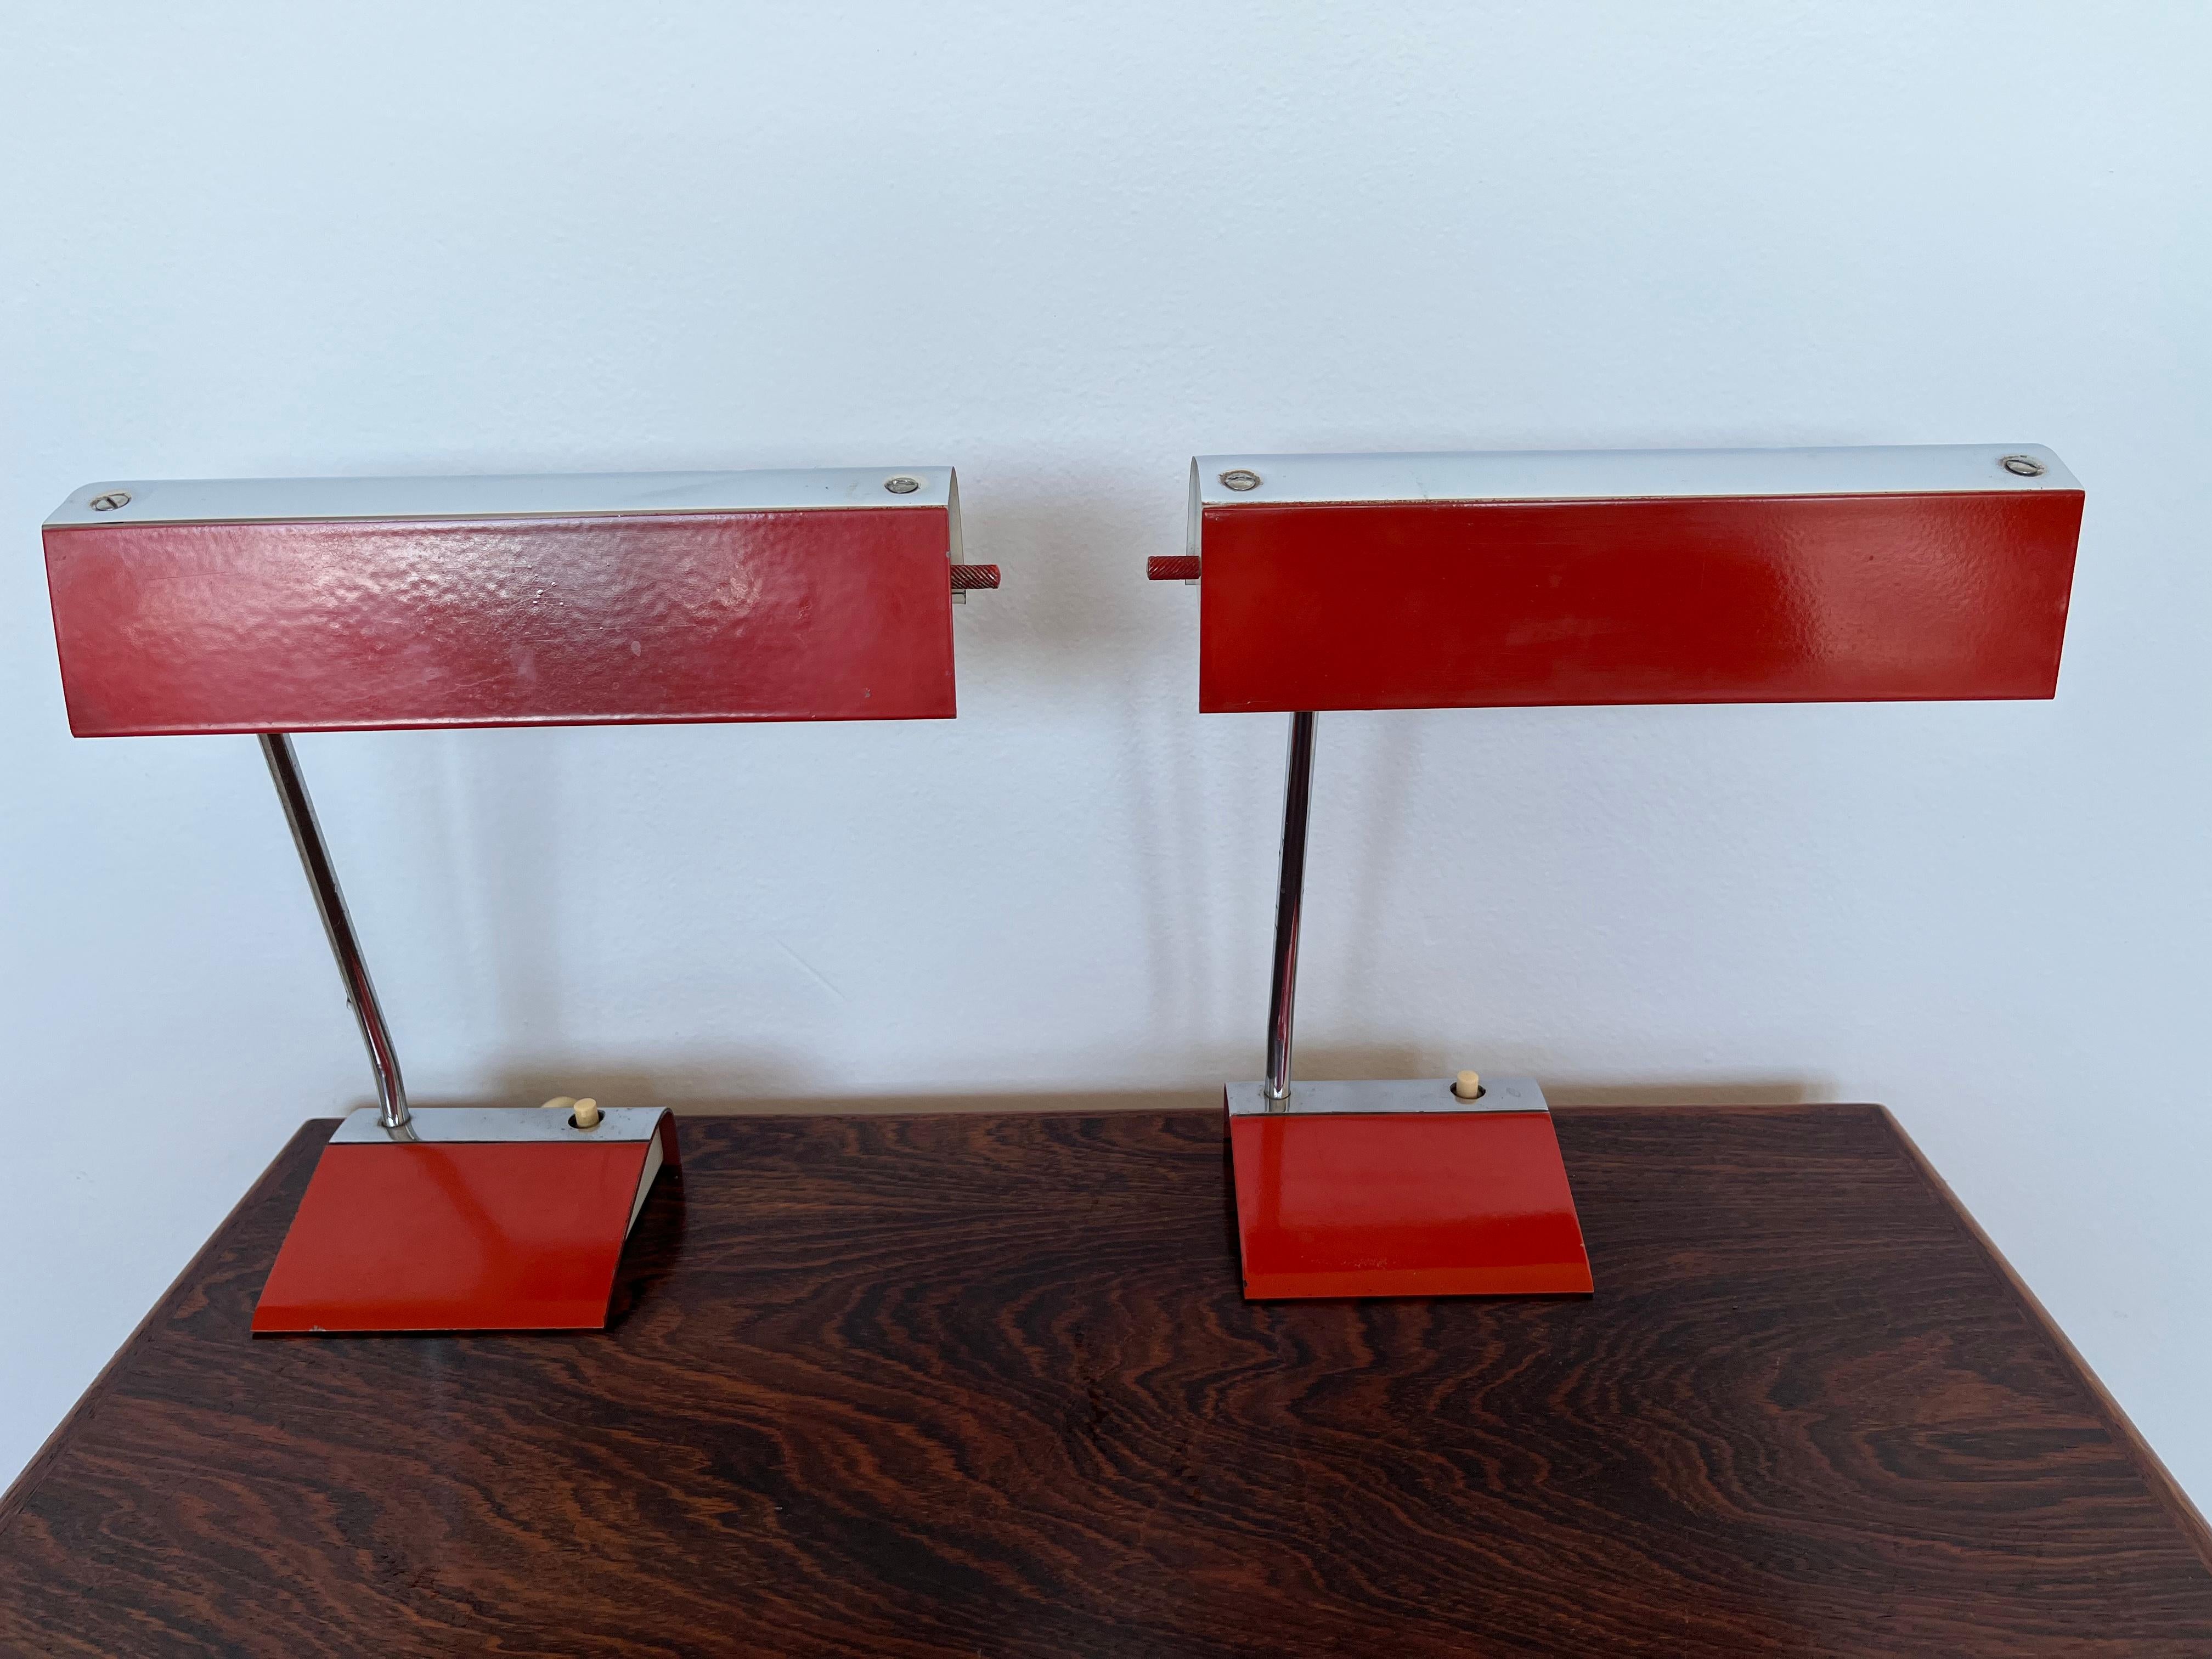 Pair of Two Design Mid Century Table Lamps by Drupol, 1960s / Czechoslovakia For Sale 2